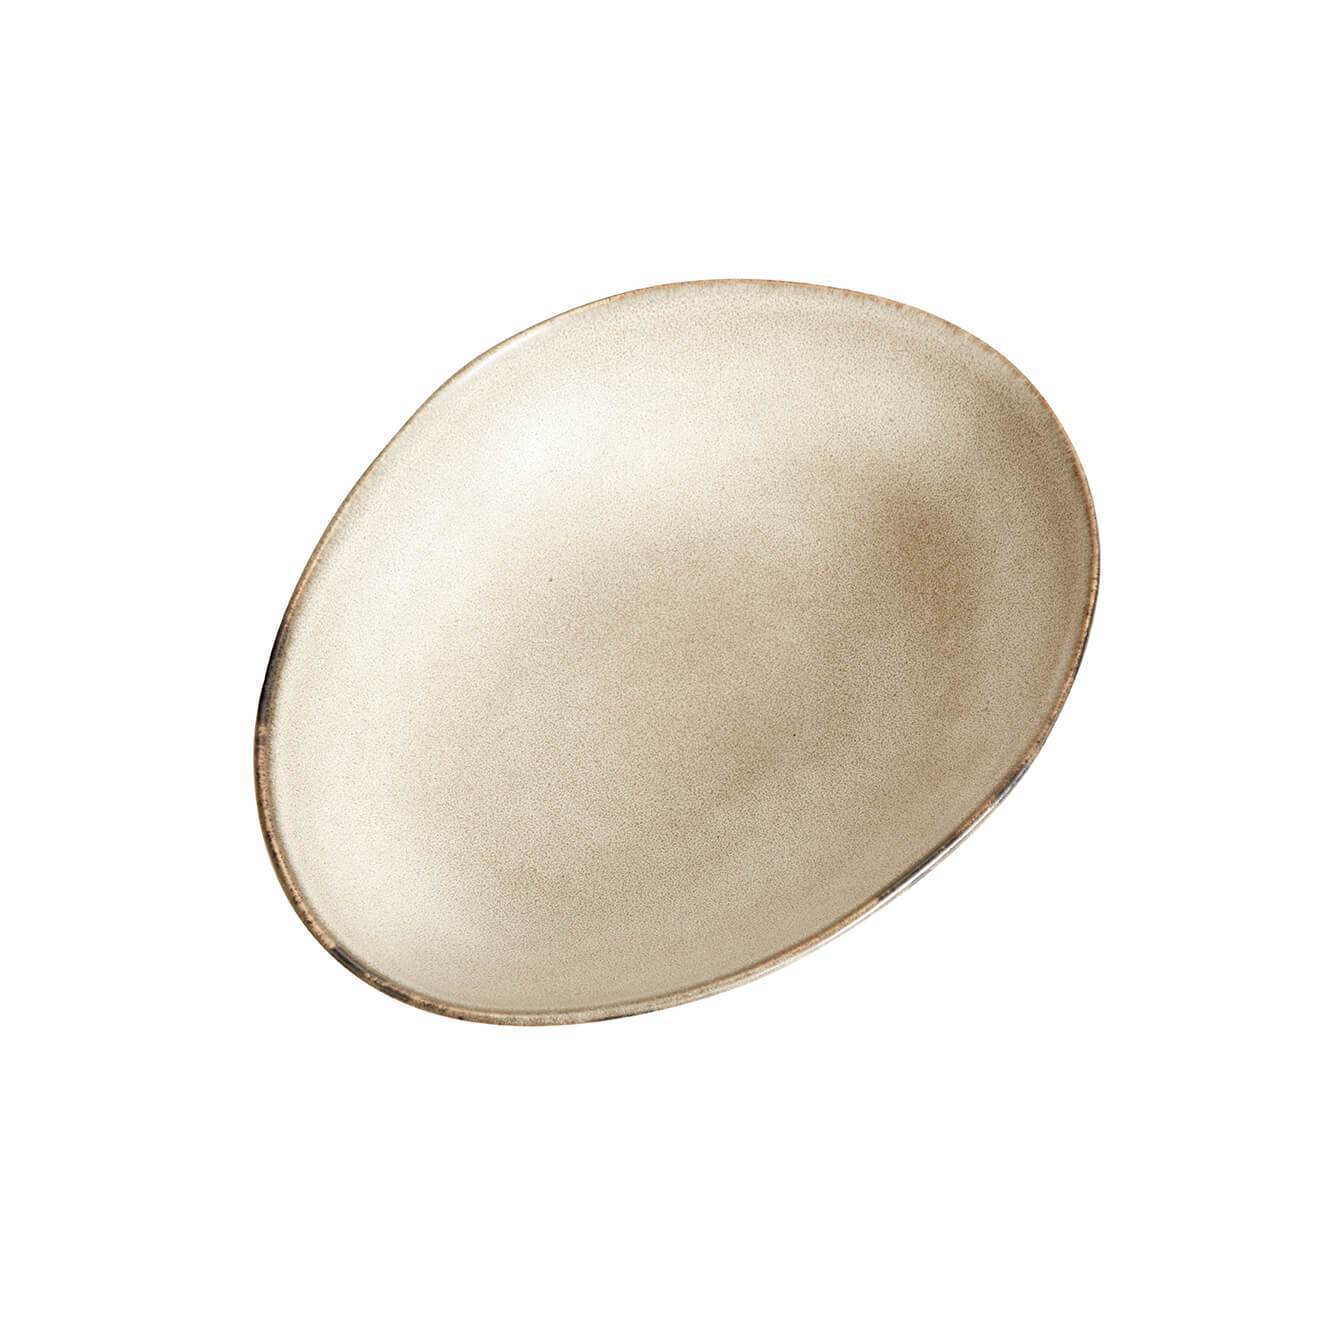 Muubs Mame Serving Bowl Oyster, 19 cm